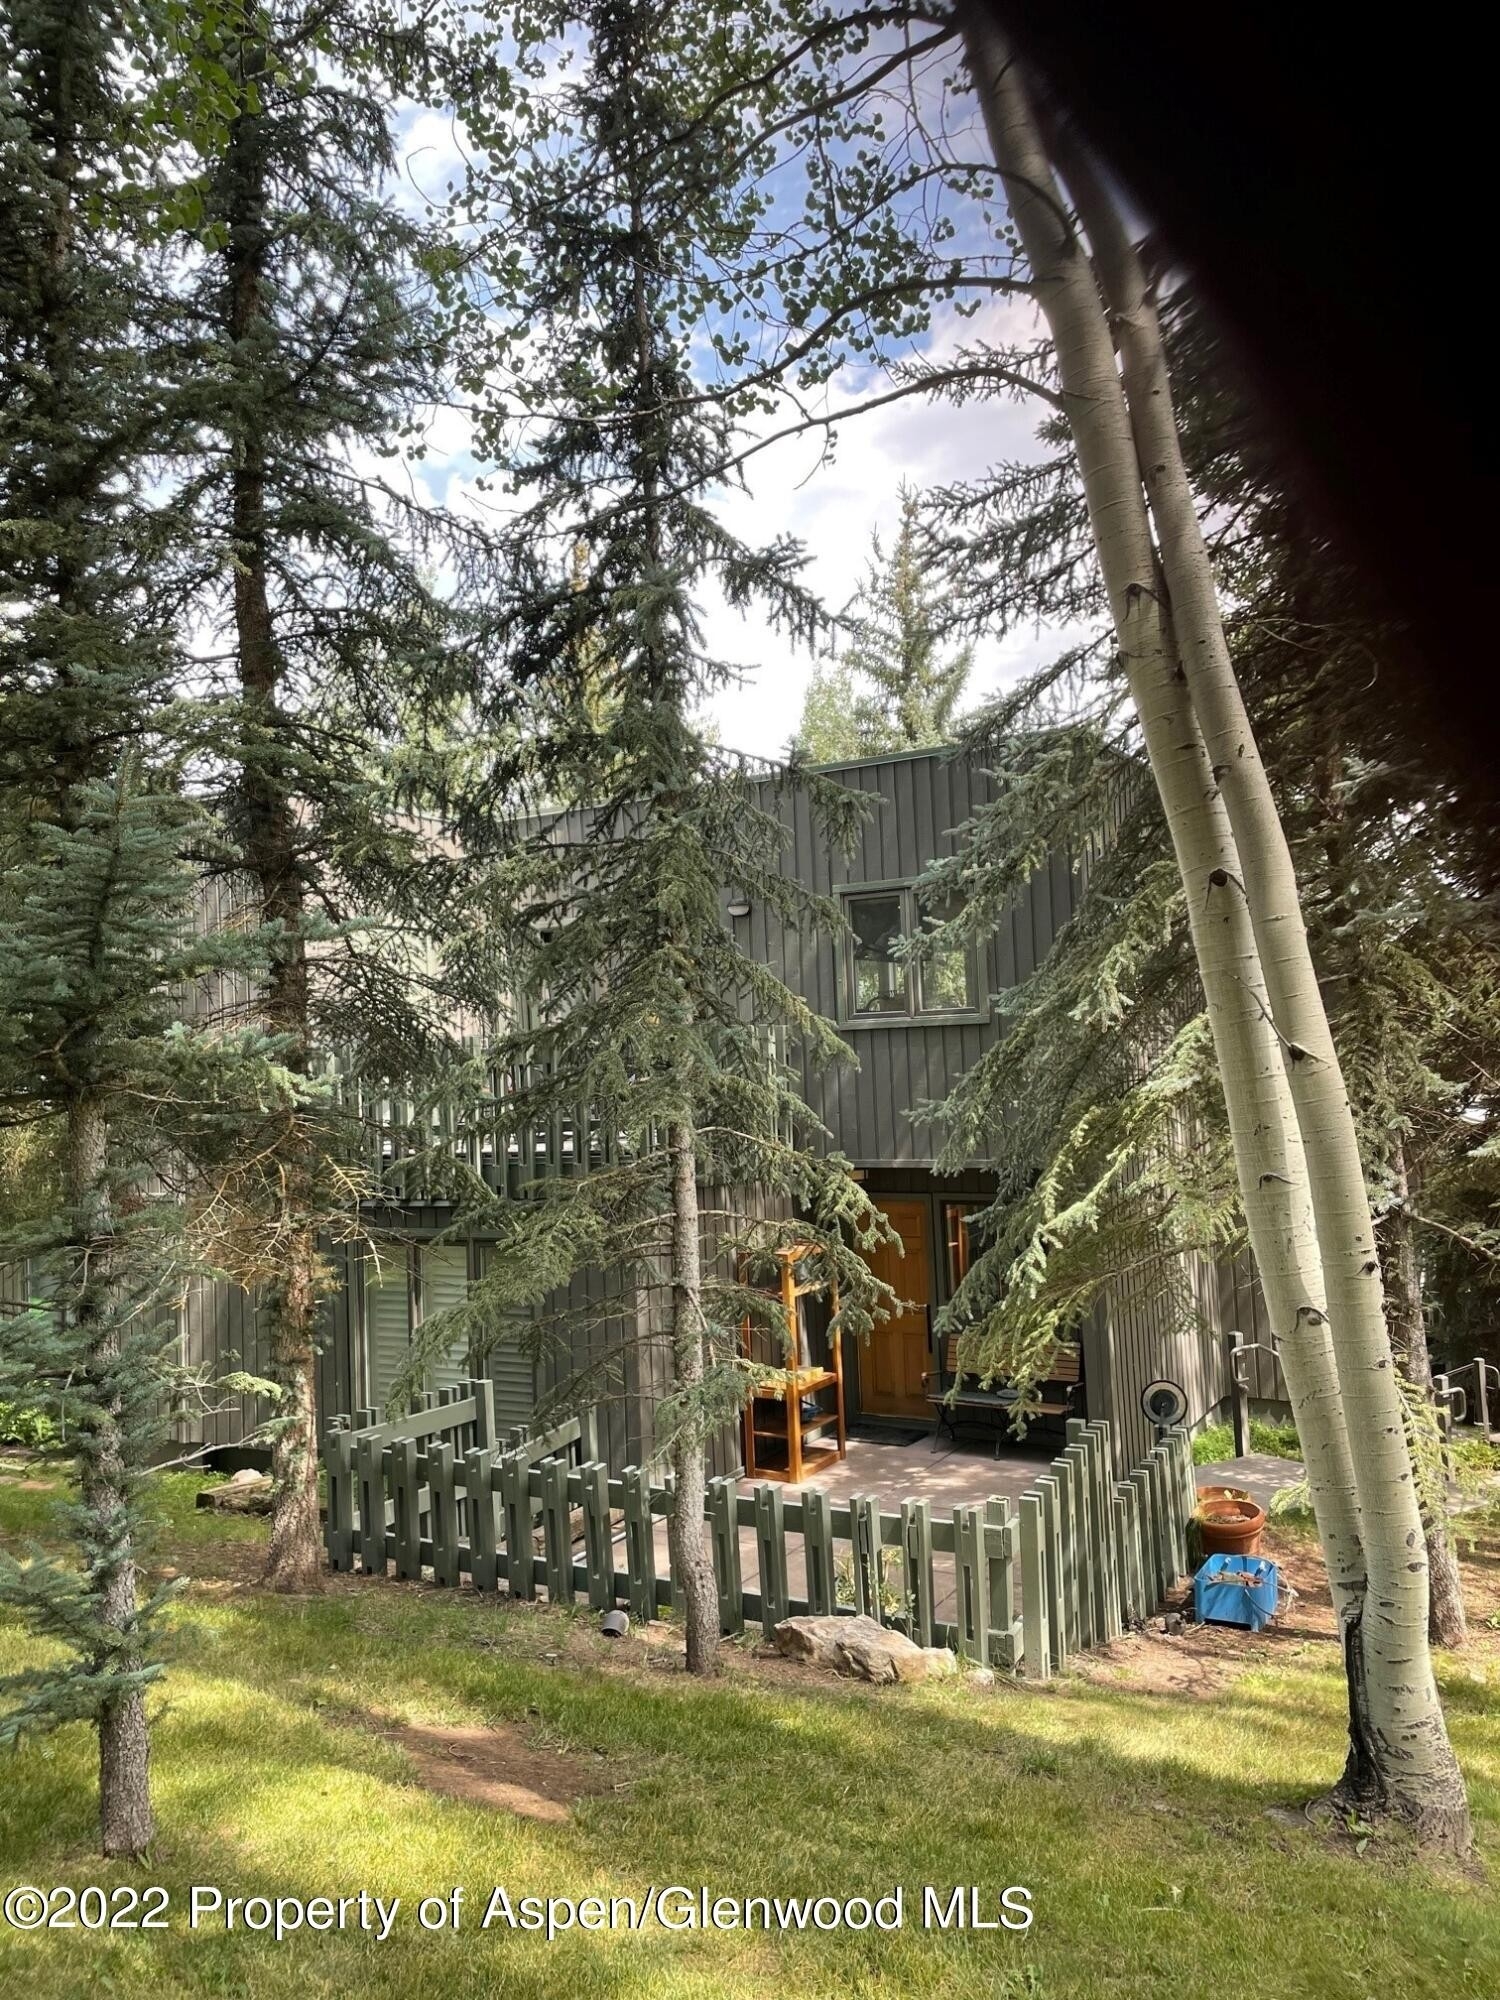 Single Family Home at Snowmass Village, CO 81615